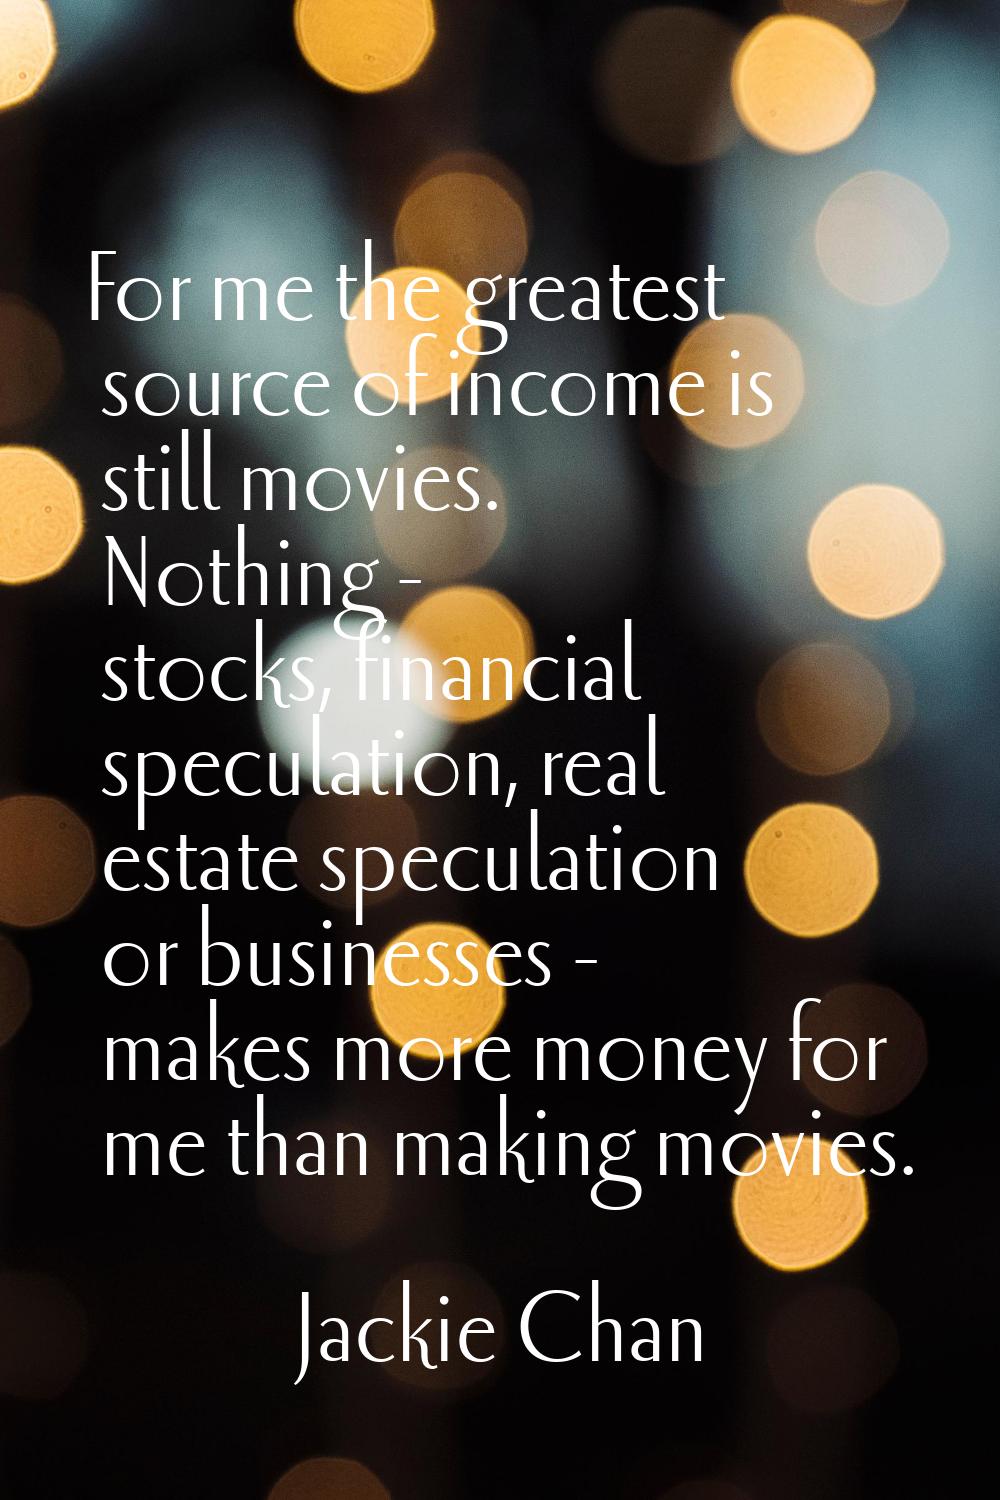 For me the greatest source of income is still movies. Nothing - stocks, financial speculation, real